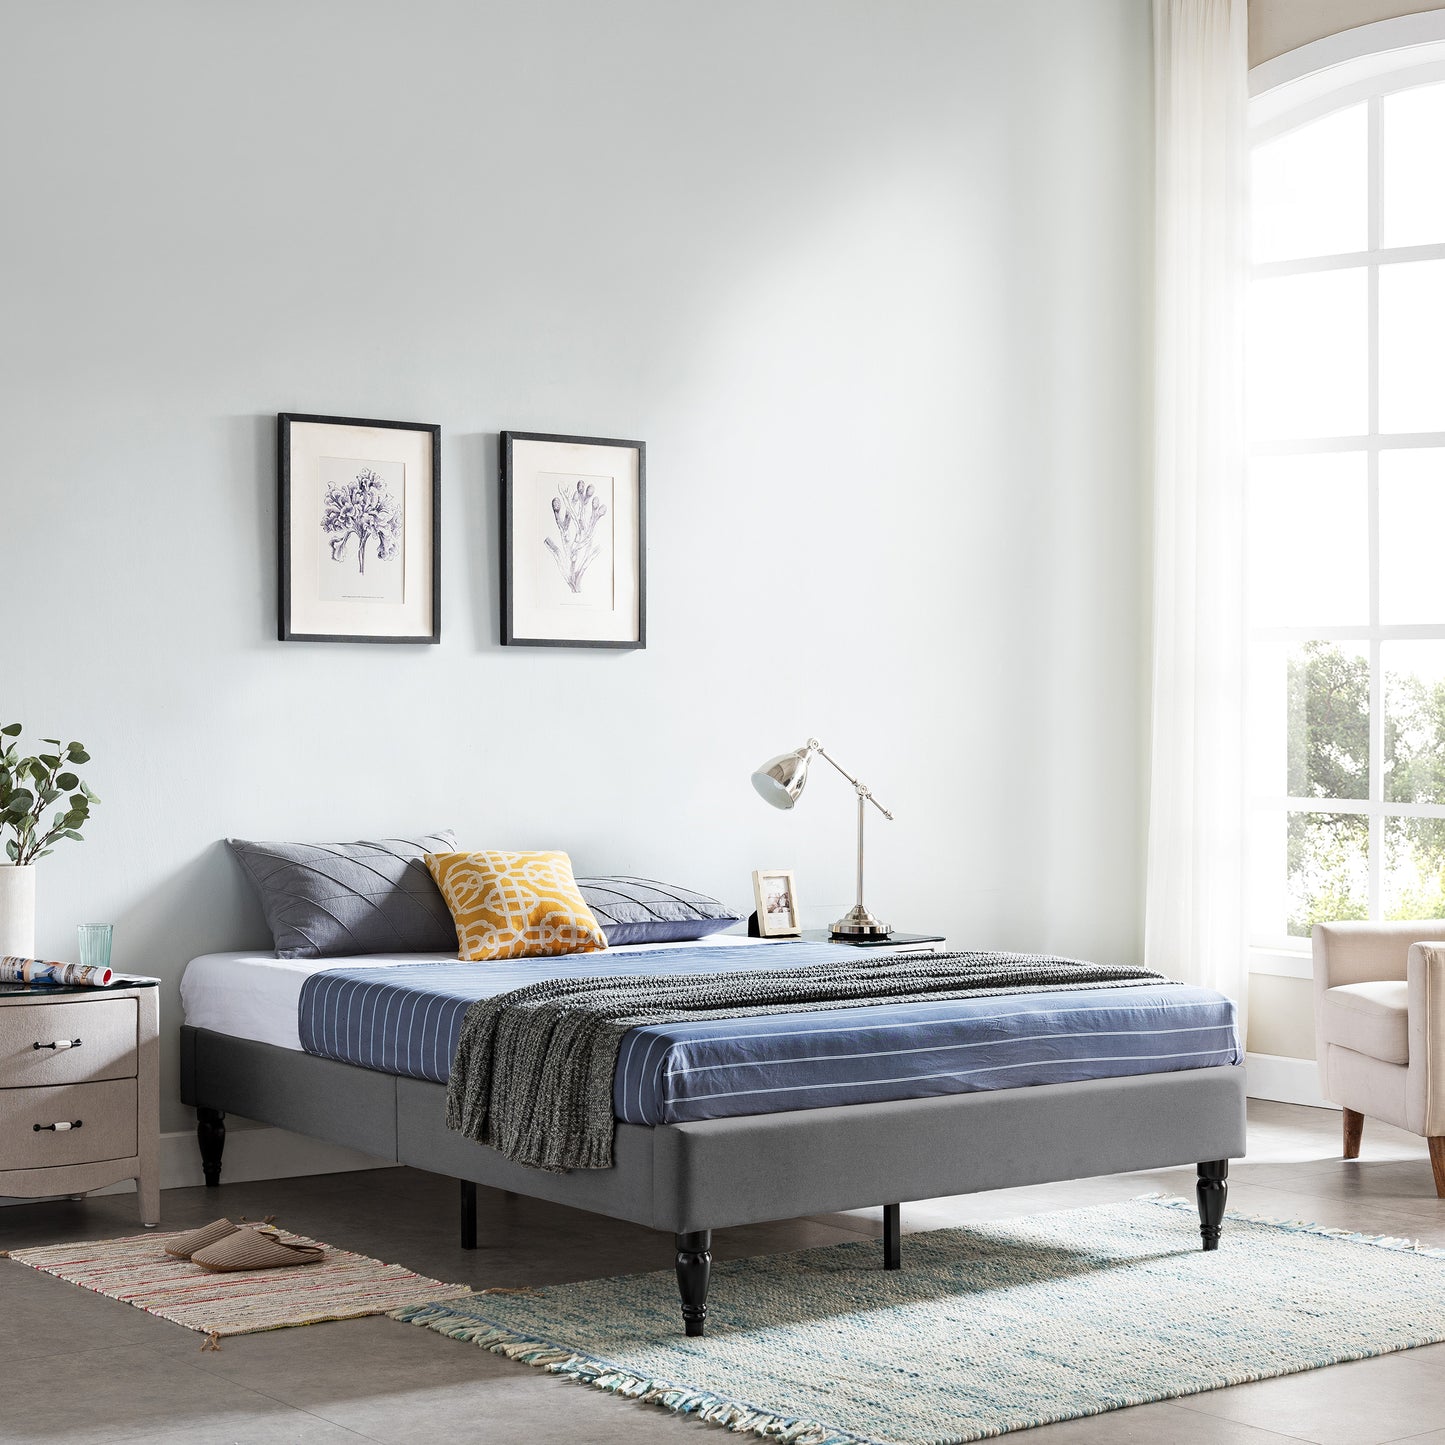 Luca Contemporary Upholstered Queen Bed Frame with Turned Legs